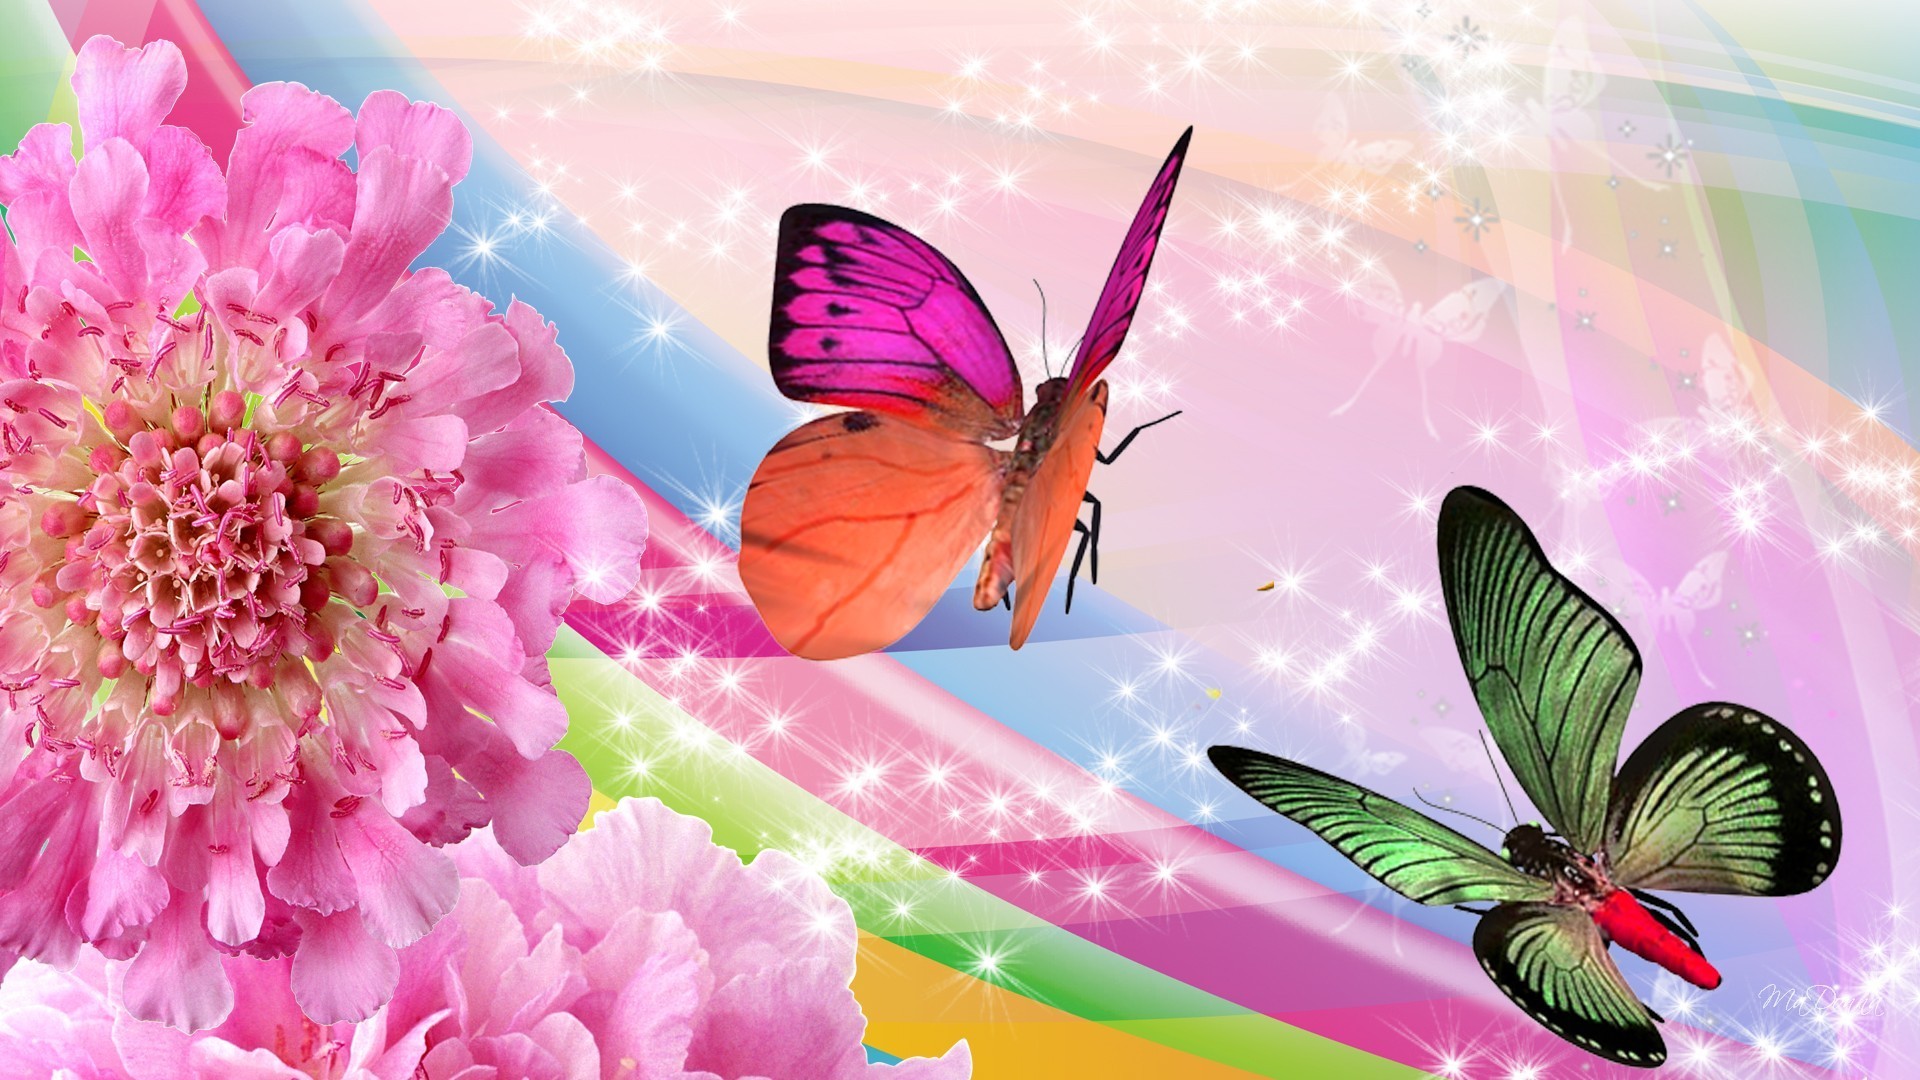 1920x1080 Butterflies Tag - Rainbow Flowers Butterflies Butterfly Firefox Persona Sparkles  Pink Bright Stars Mobile Wallpapers Hd